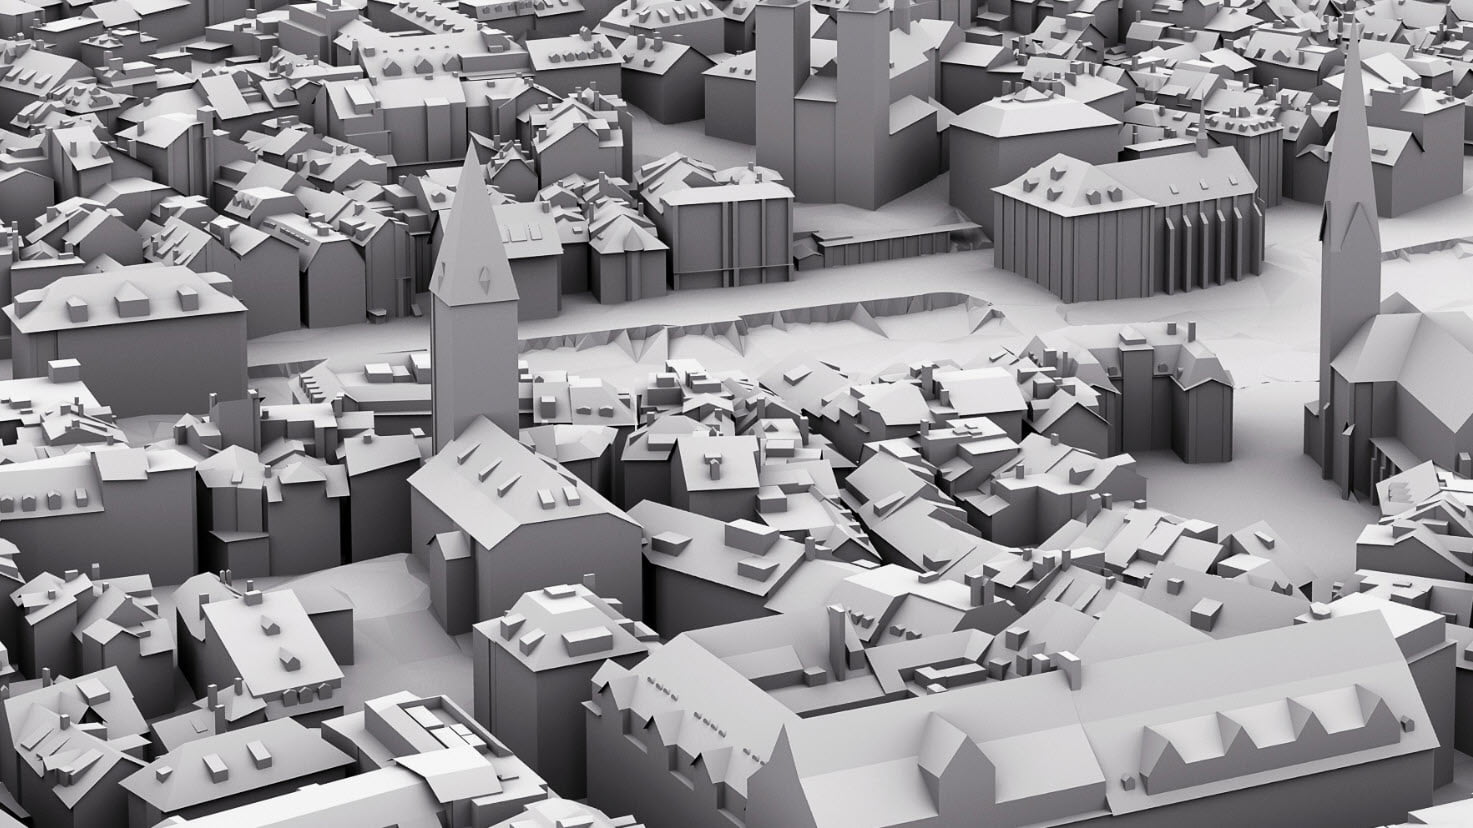 Zurich releases 3D model of the city under a public domain license 